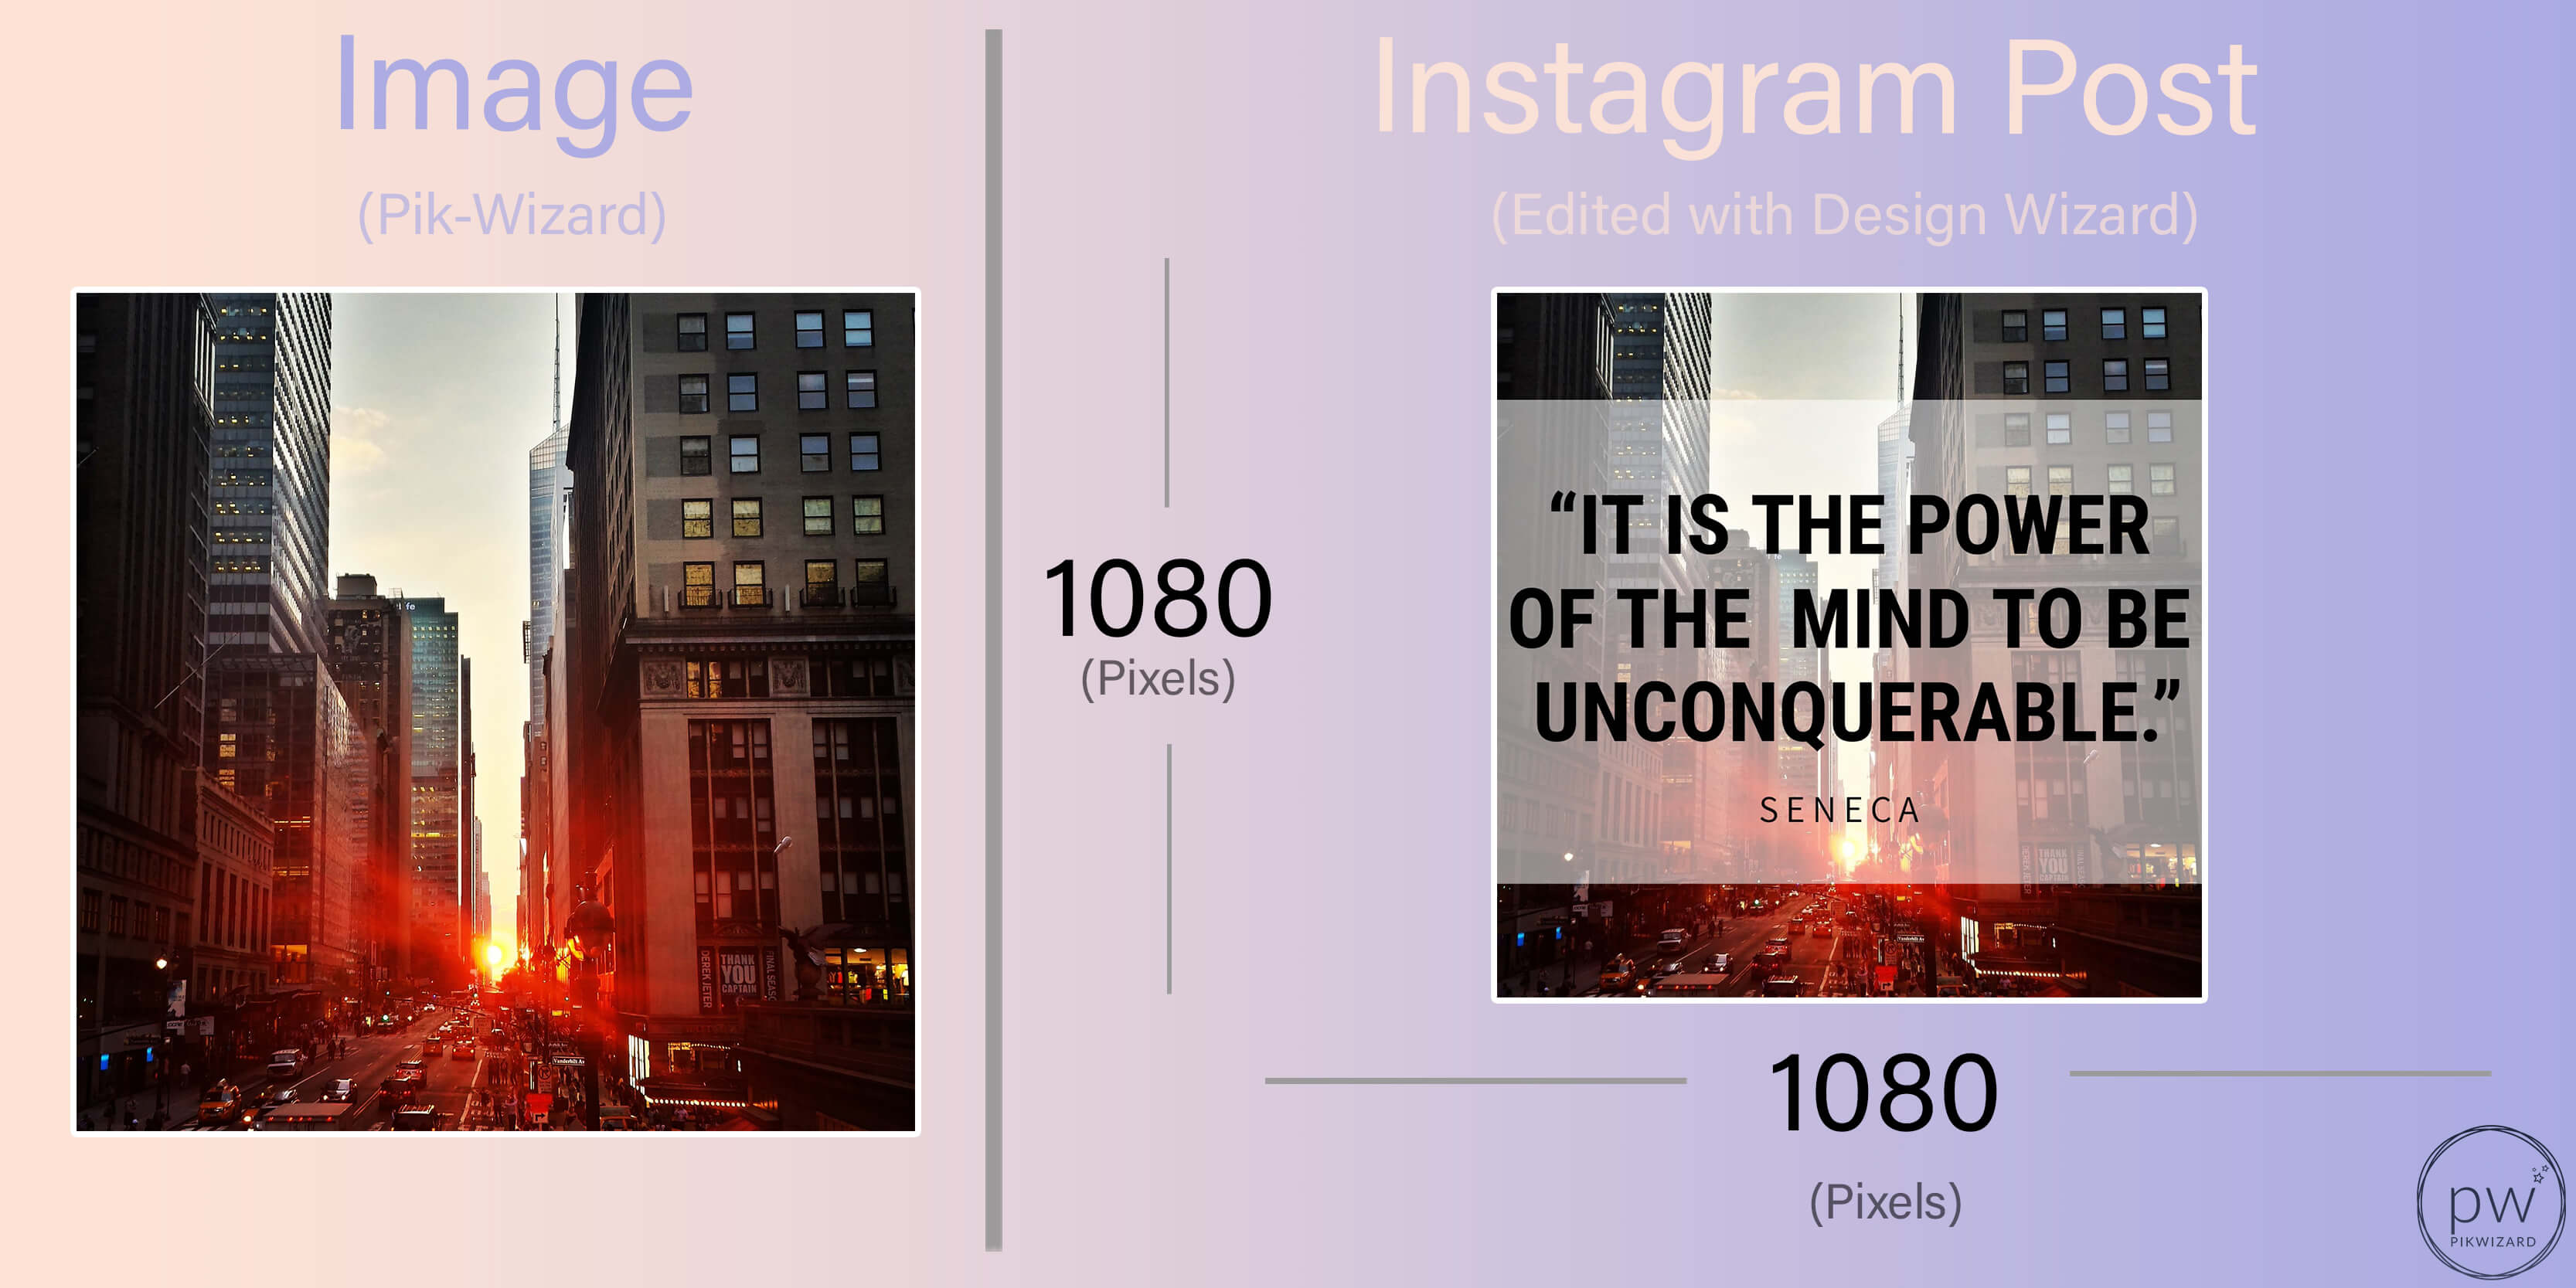 Side by side stock image and edited instagram post of an inspiring business quote - A complete beginner's guide on how to post on Instagram from a PC or Mac - Image